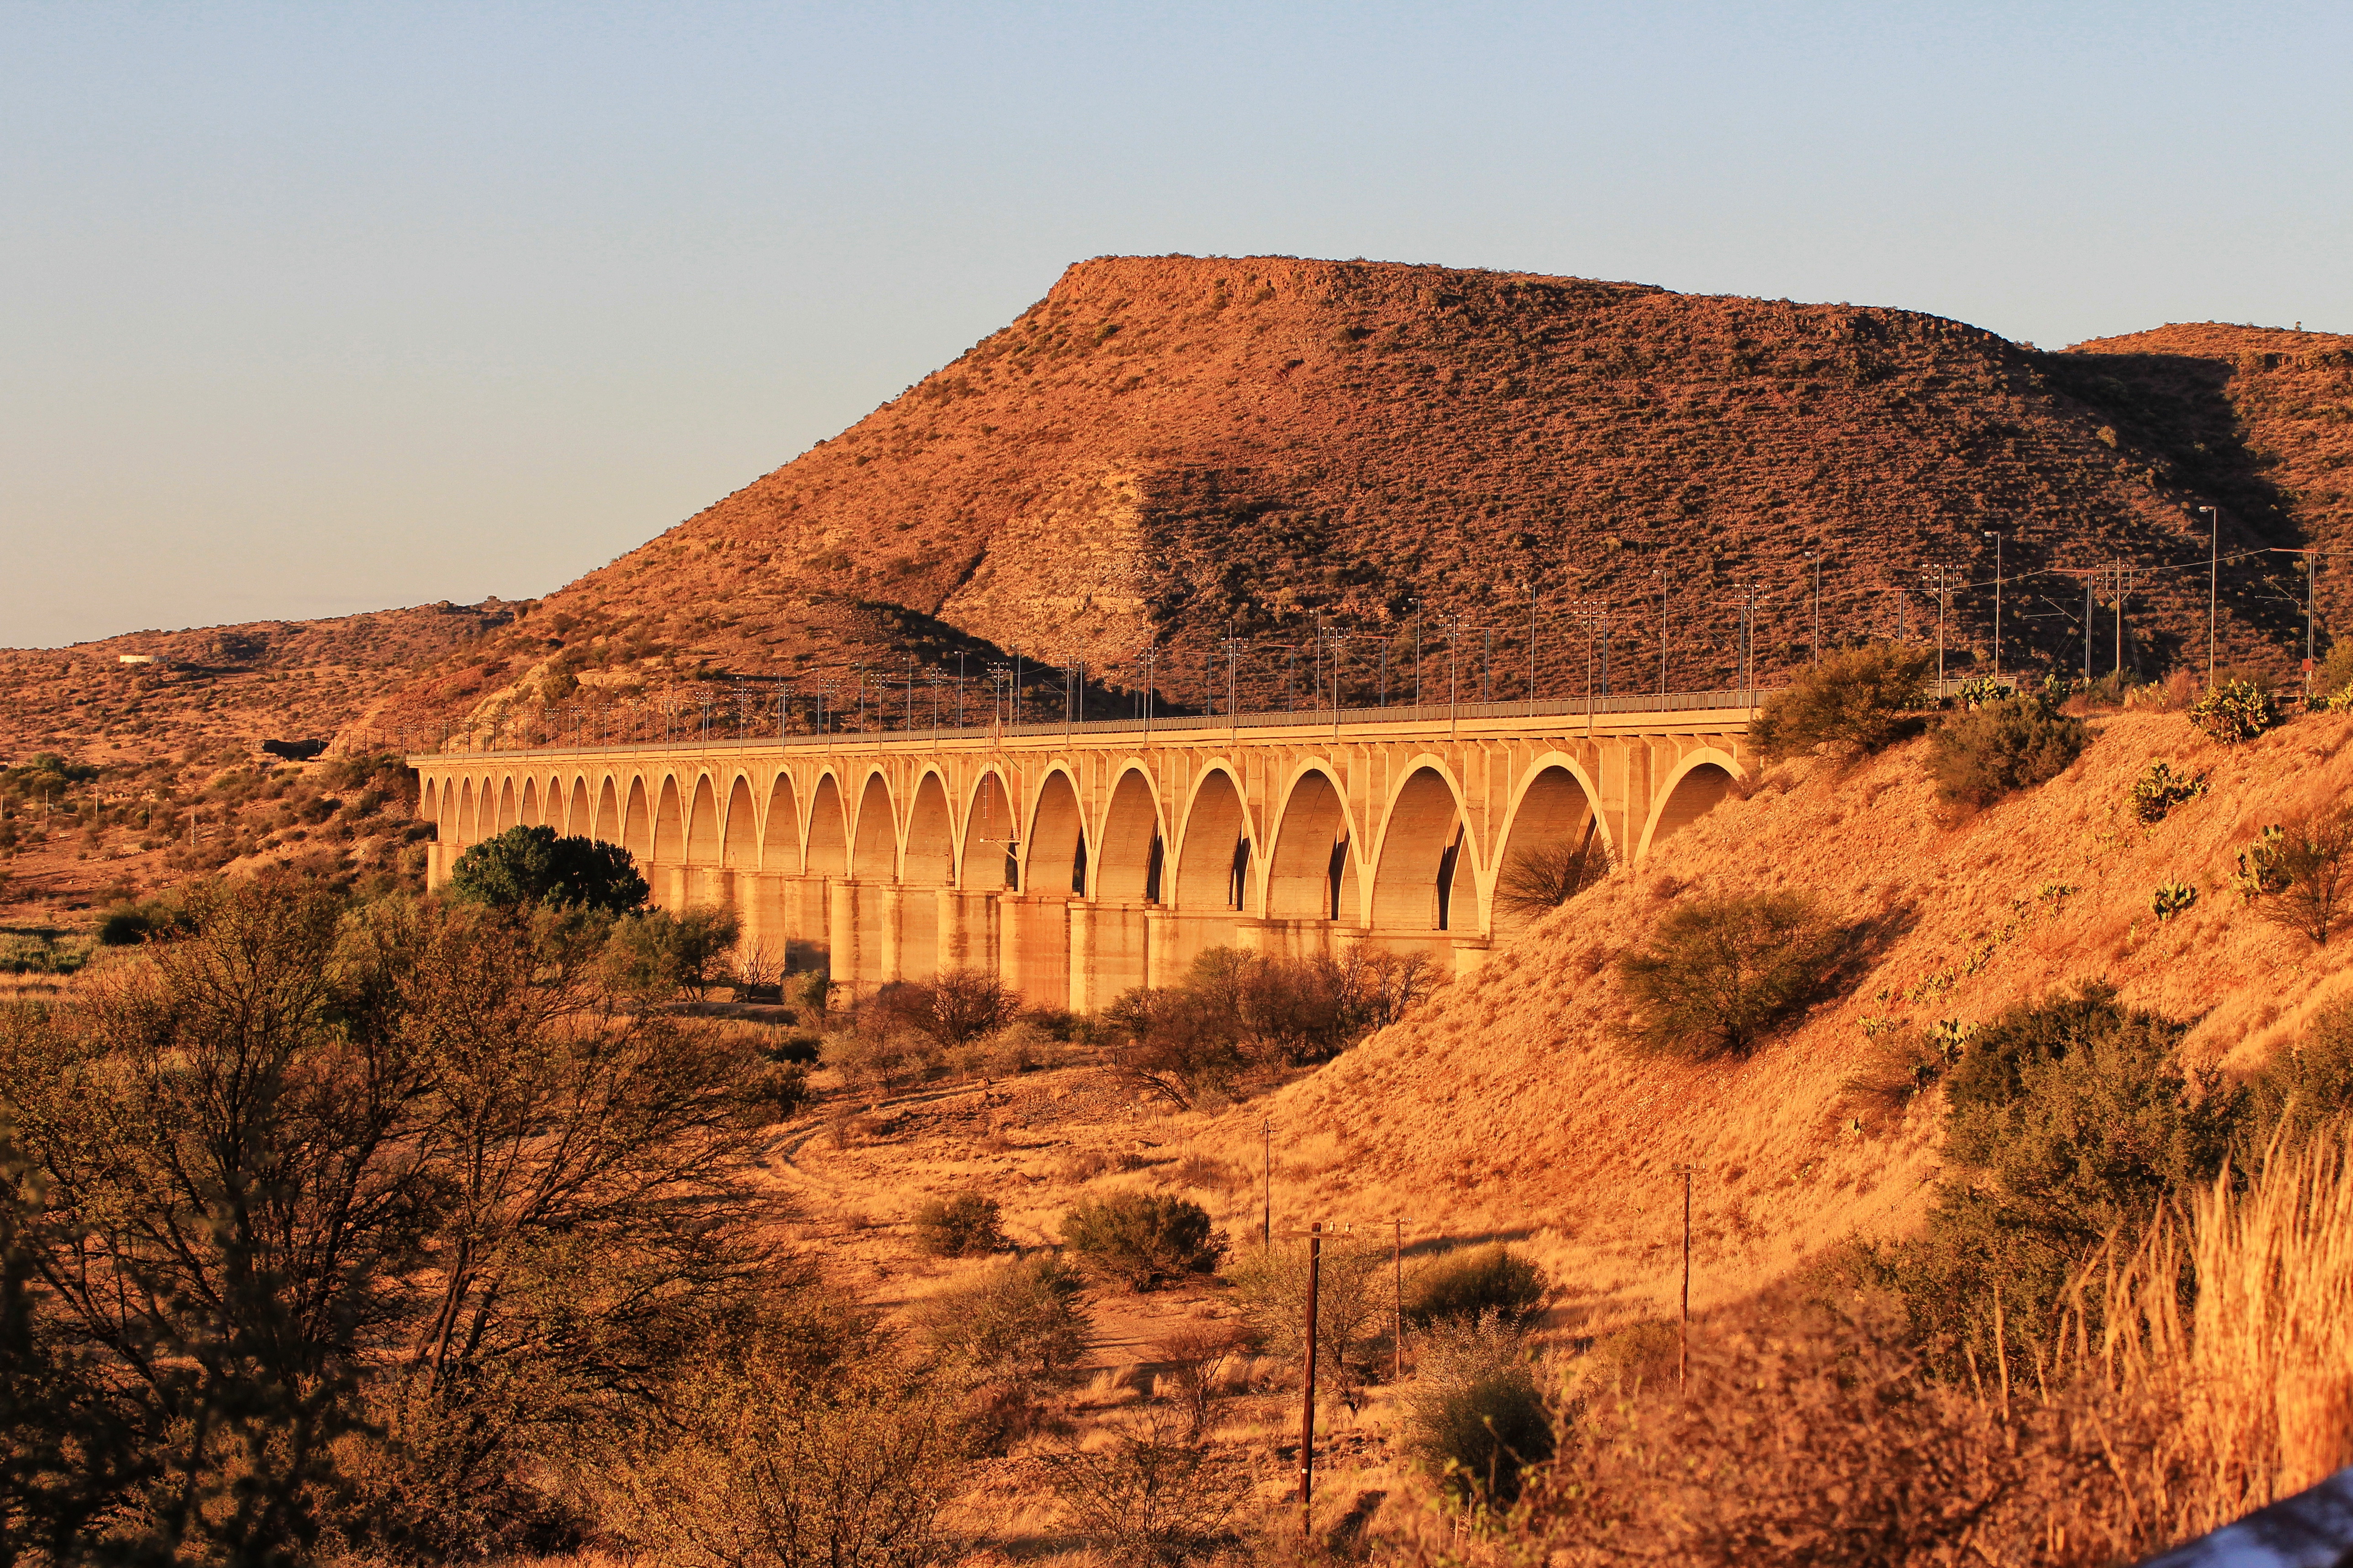 The Hennie Steyn rail-and-road bridge outside Bethulie, which arches over the Orange River before its banks broaden into the massive Gariep Dam. Image: Chris Marais